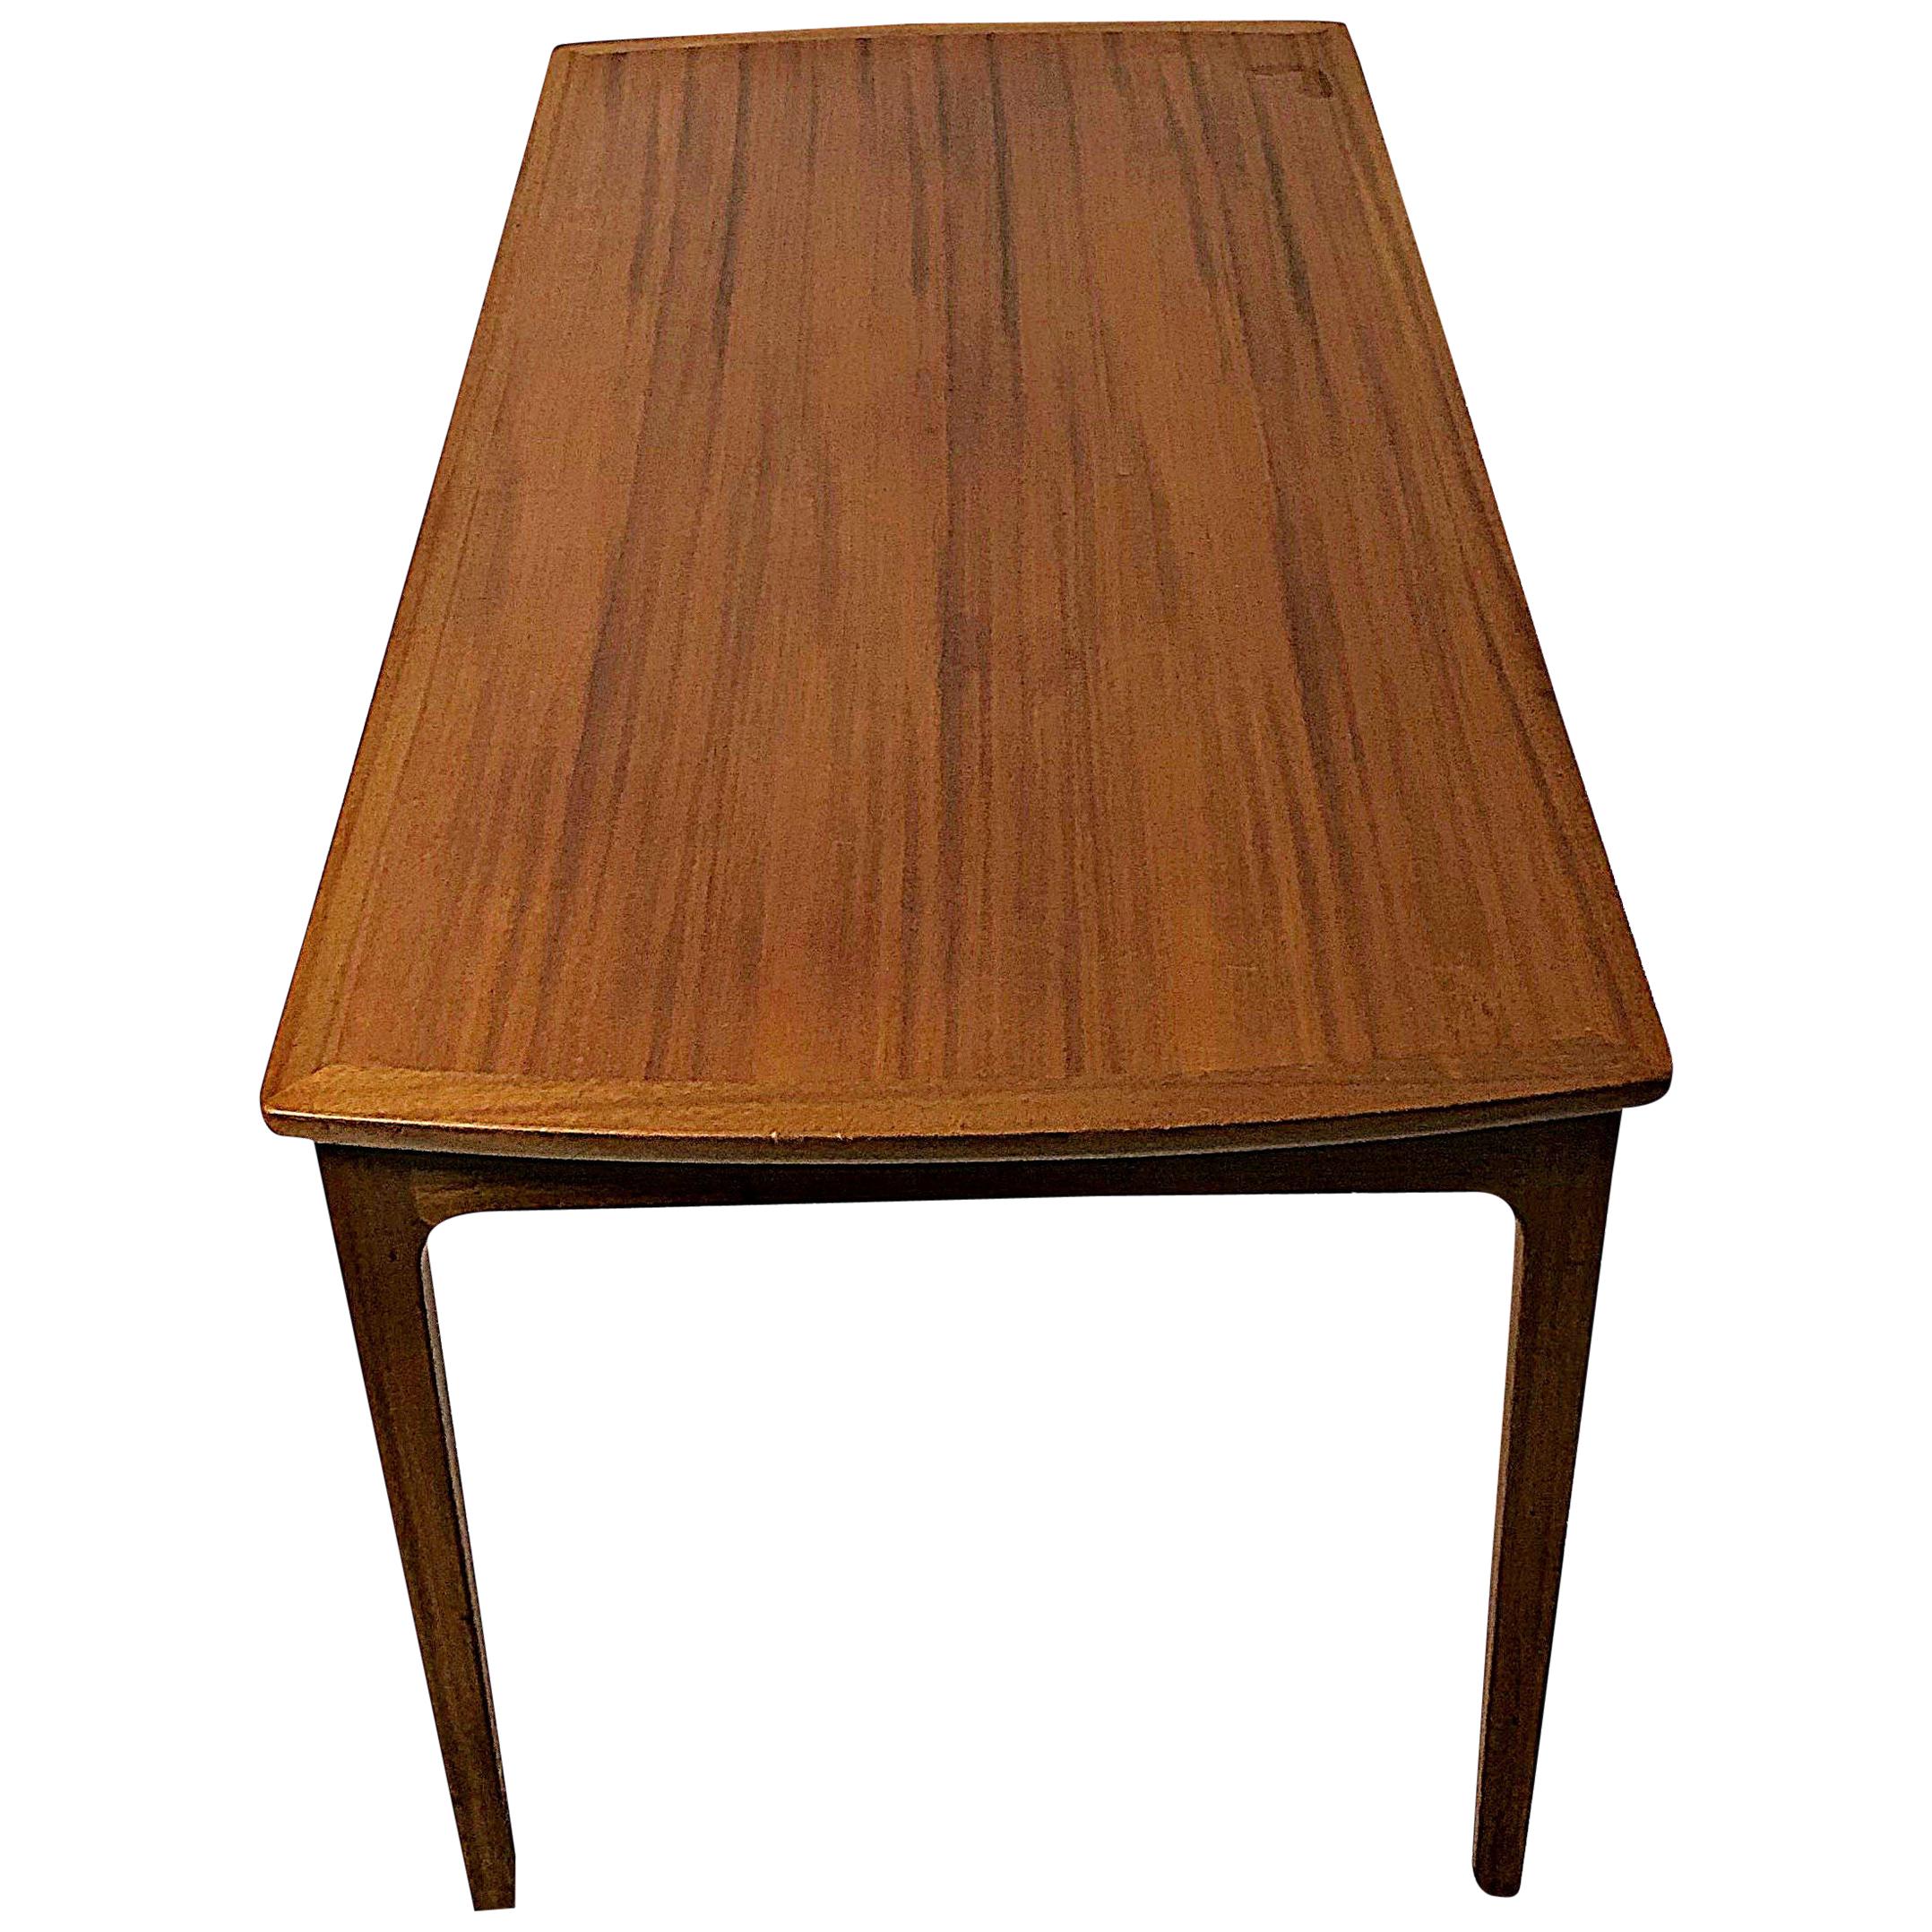 1960s Ole Wanscher Refinihed Mahogany Coffee Table by A.J. Iversen